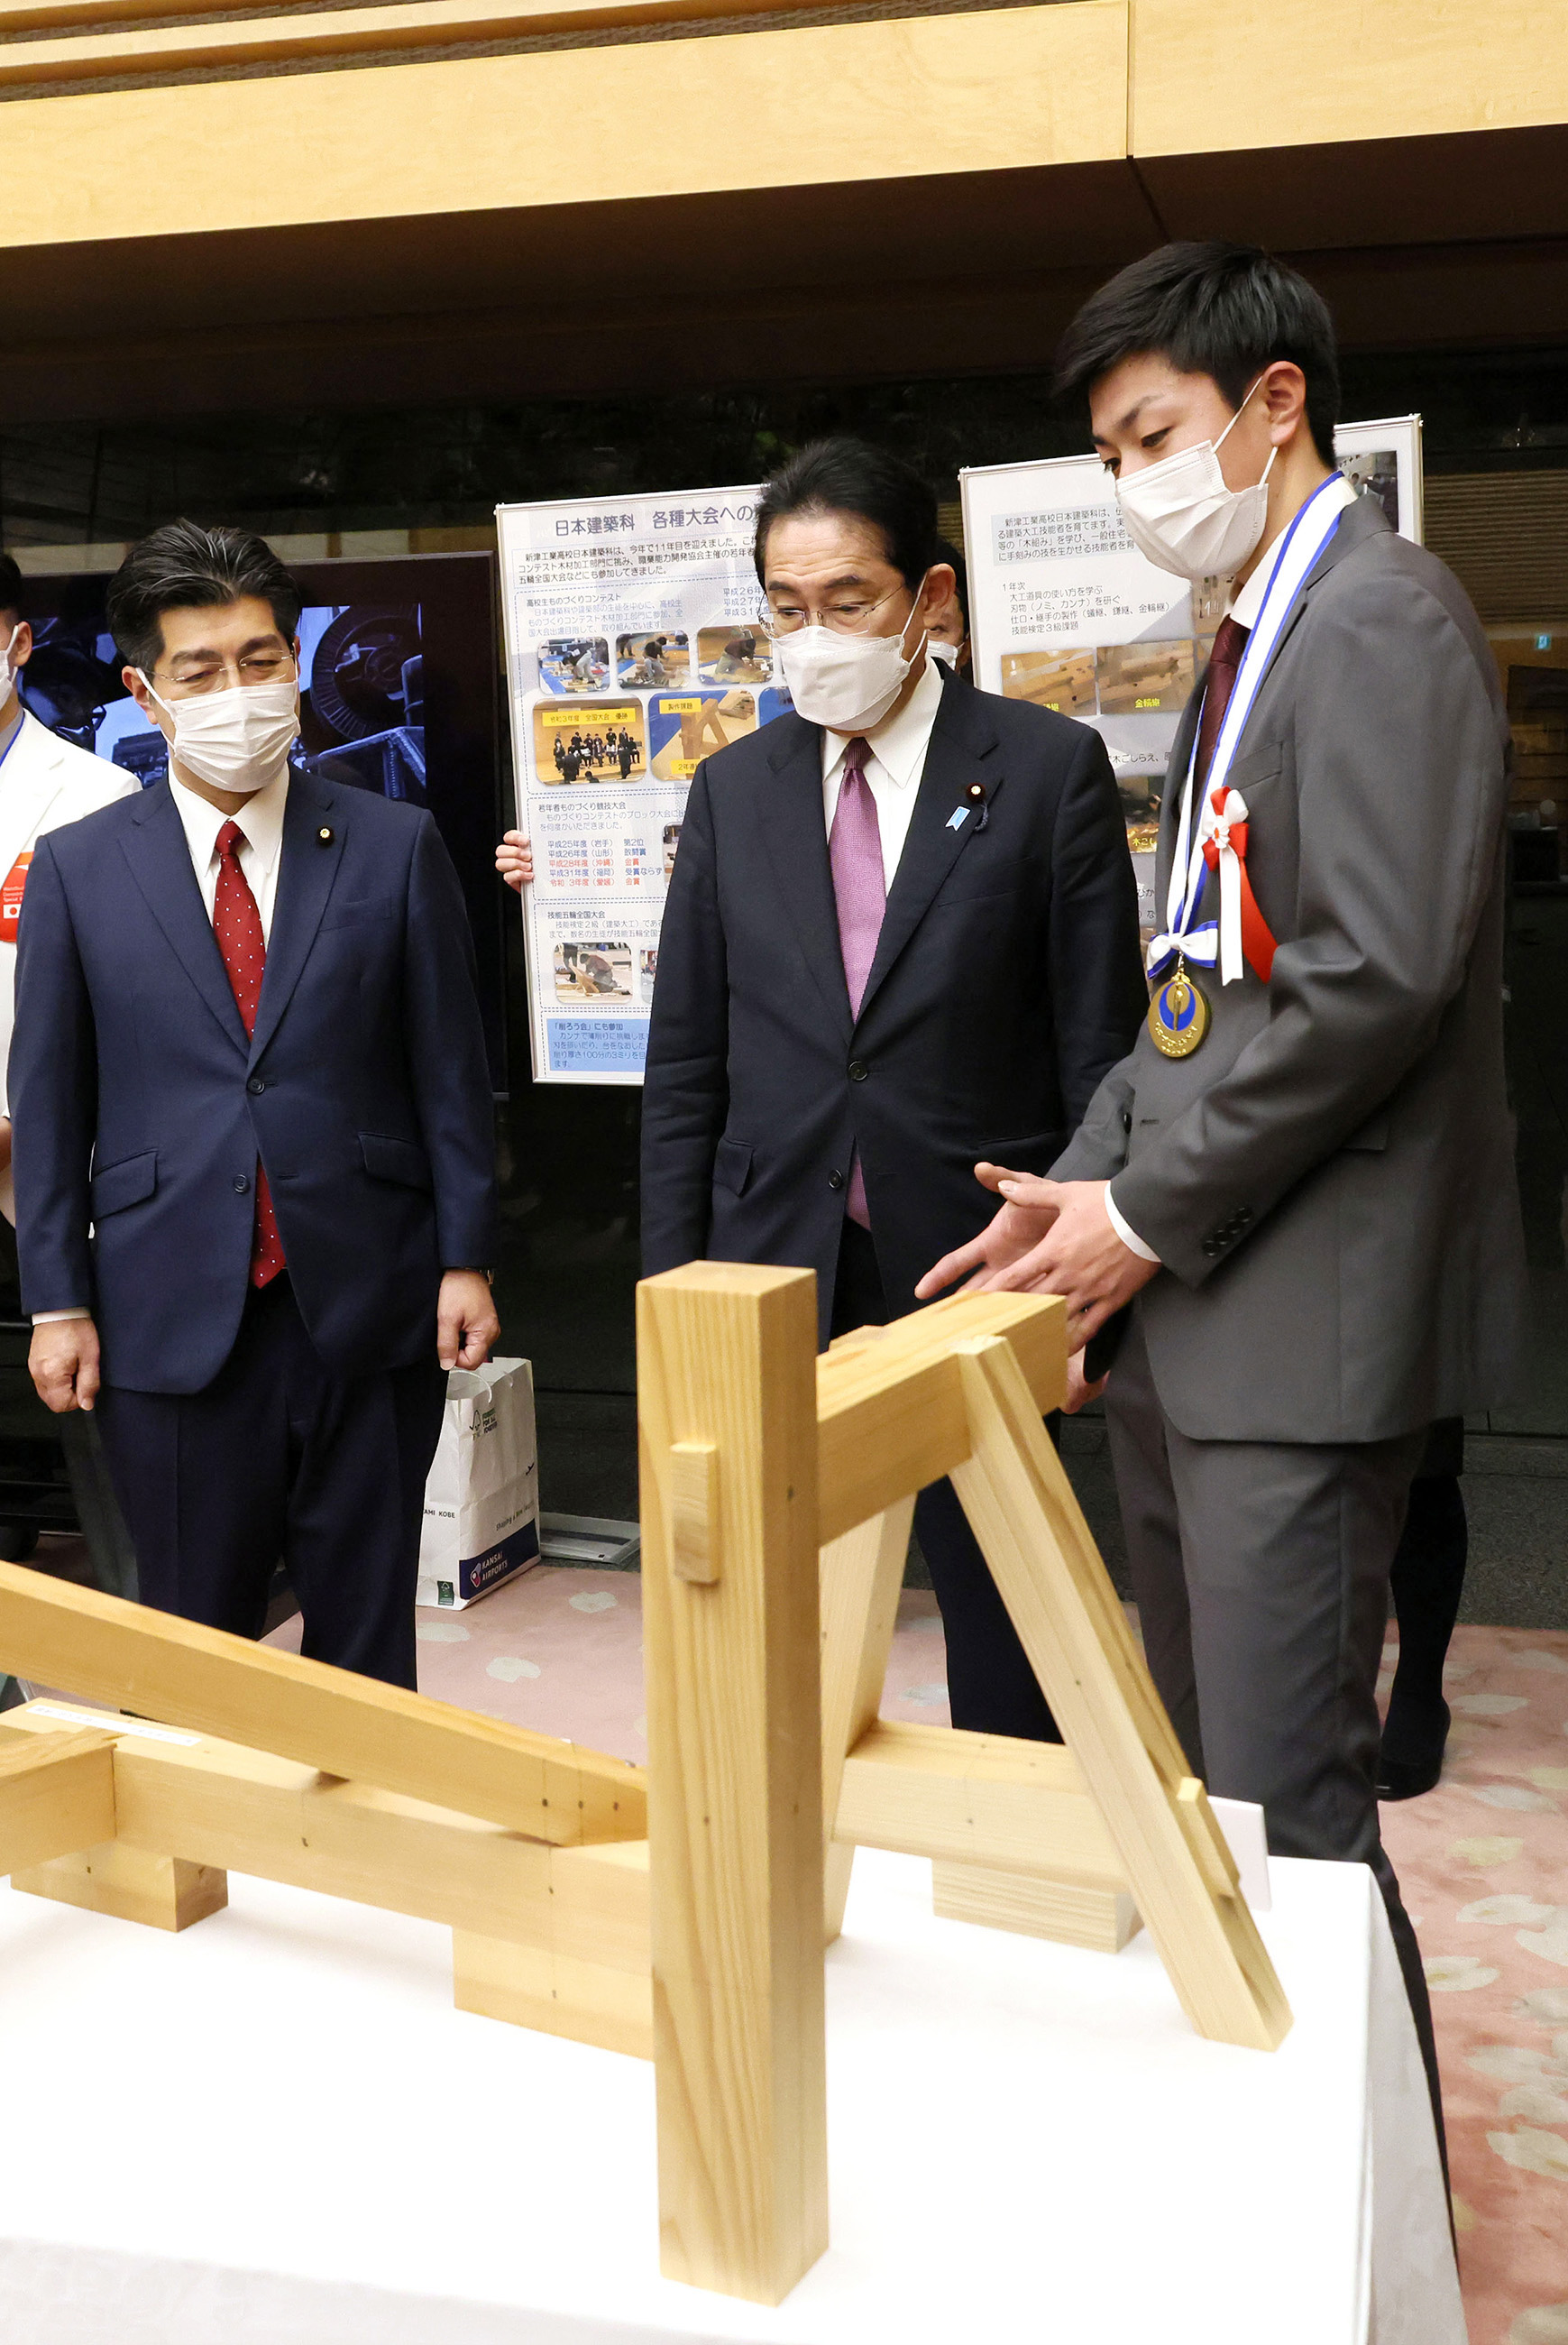 Prime Minister Kishida receiving an explanation on a product sample on display (8)